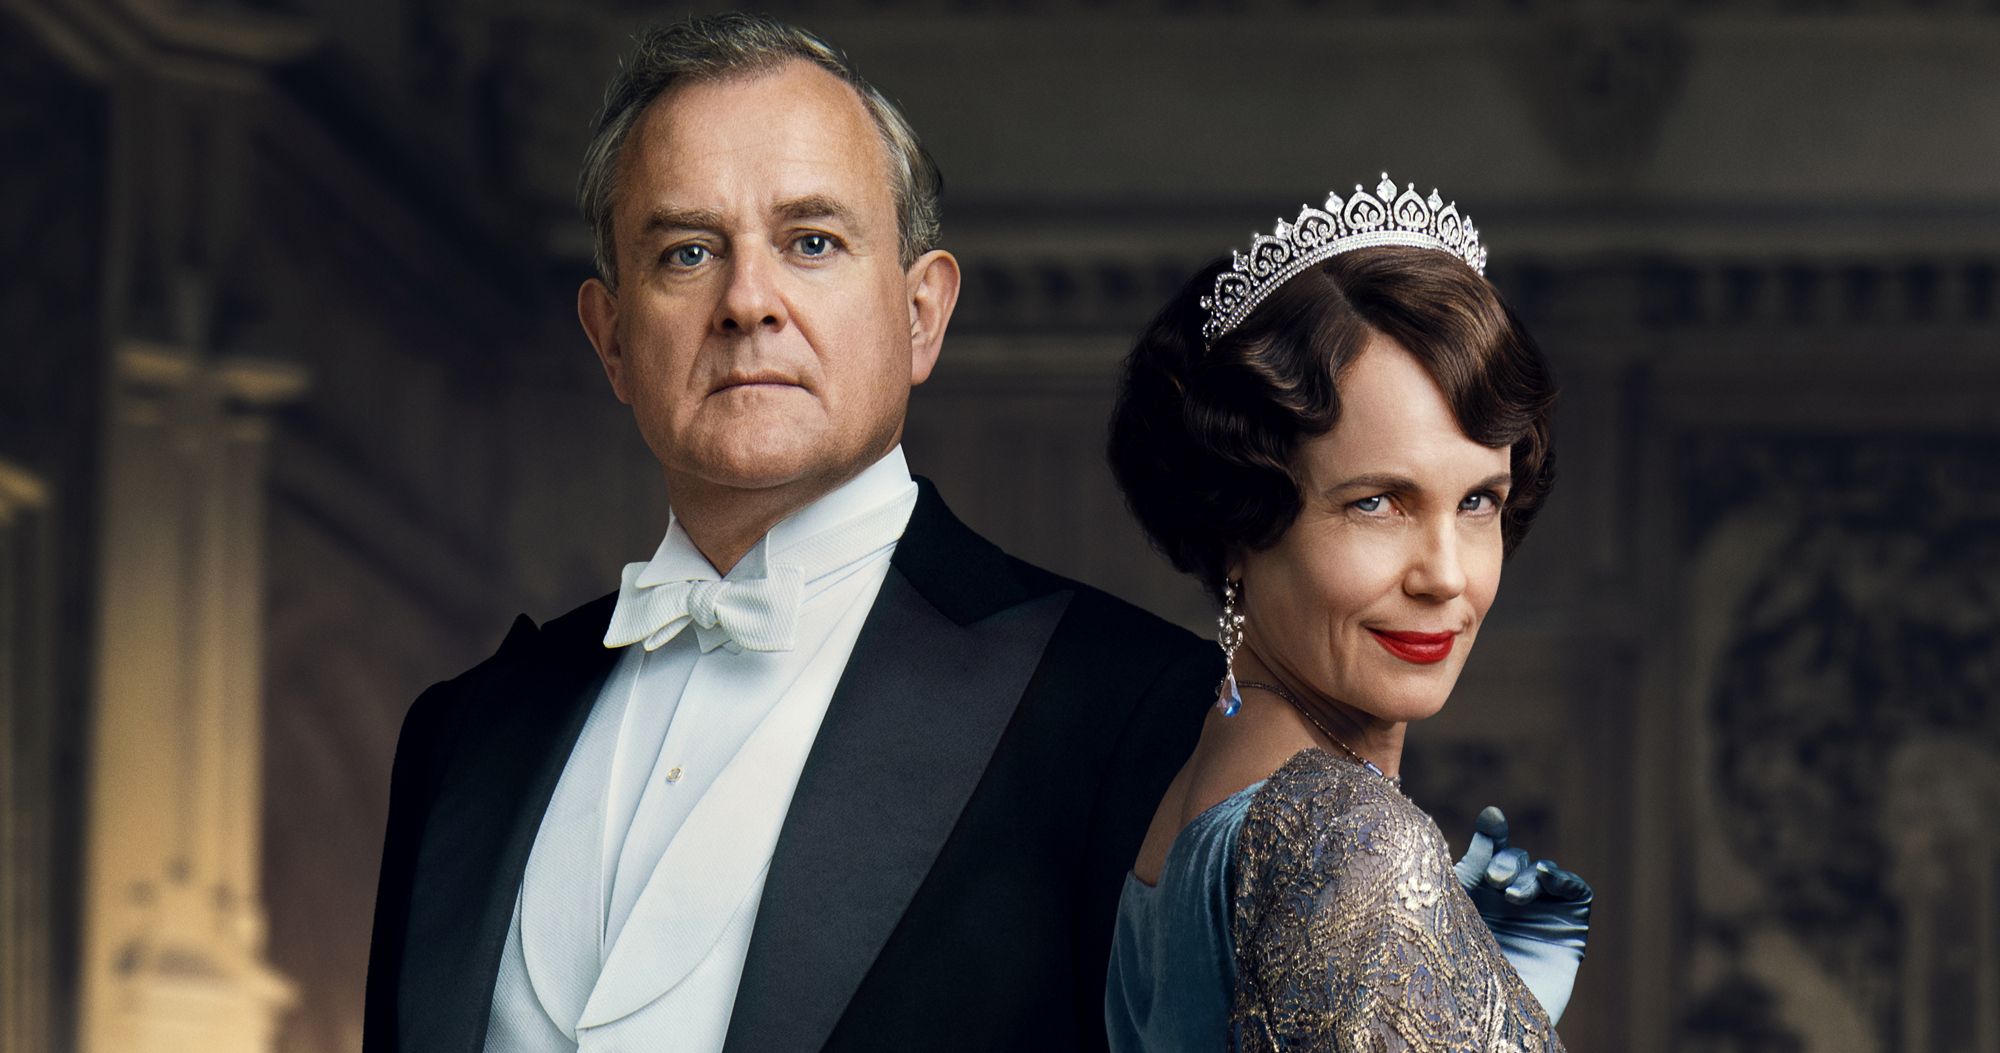 More Downton Abbey Character Posters Have the Crawley Family Ready to Party